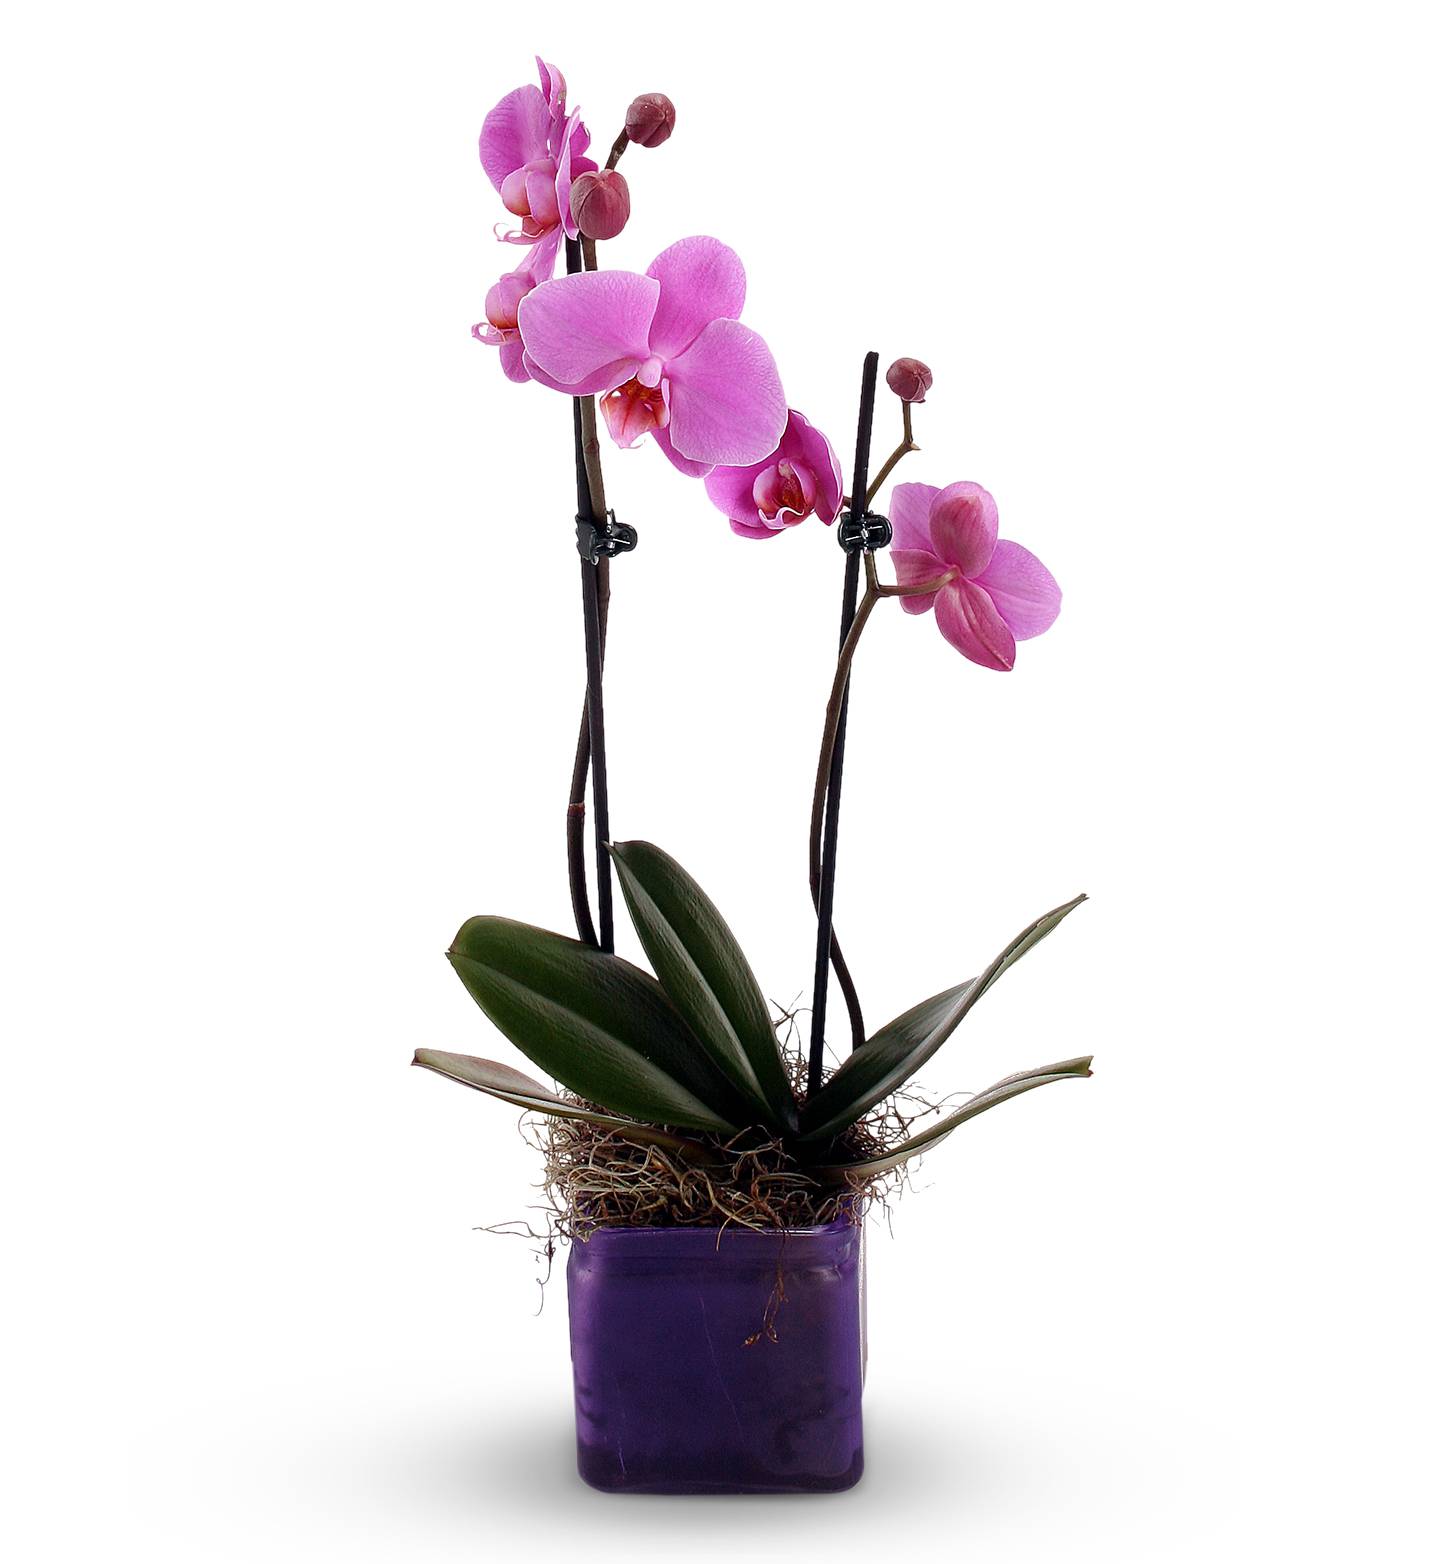 How To Take Care Of An Orchid Plant